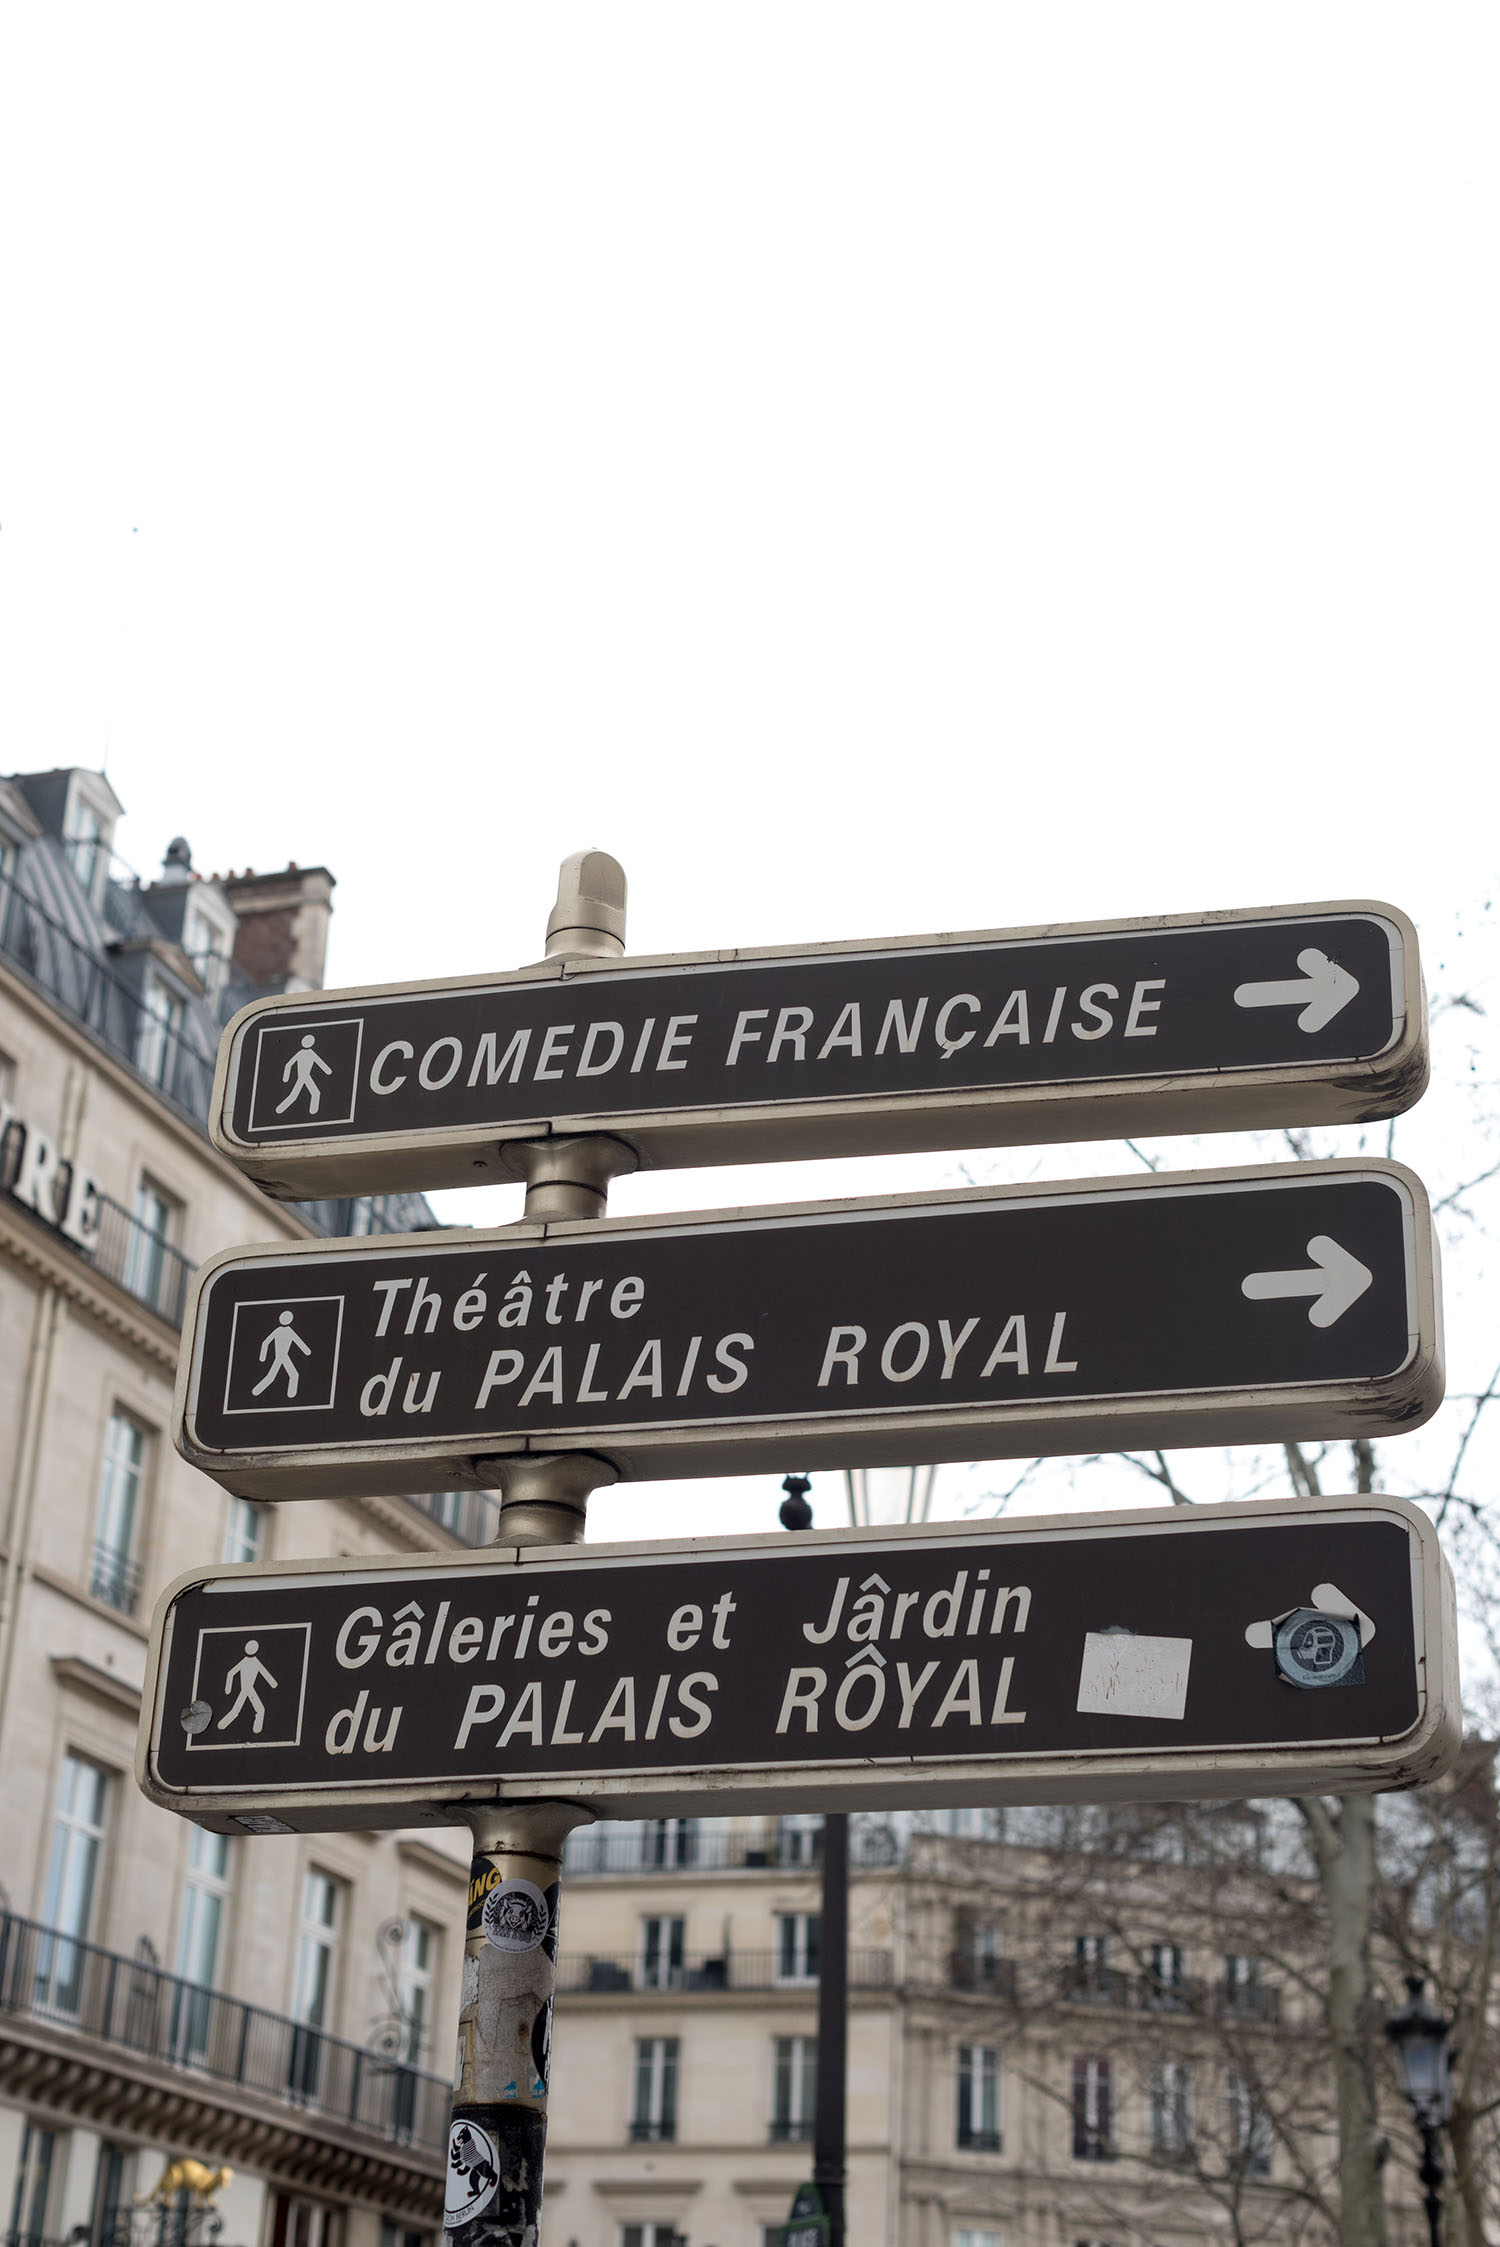 Directional signs at Place Colette in Paris, pointing towards the Comedie Francaise and Palais Royal, as captured by top Canadian travel blogger Cee Fardoe of Coco & Vera